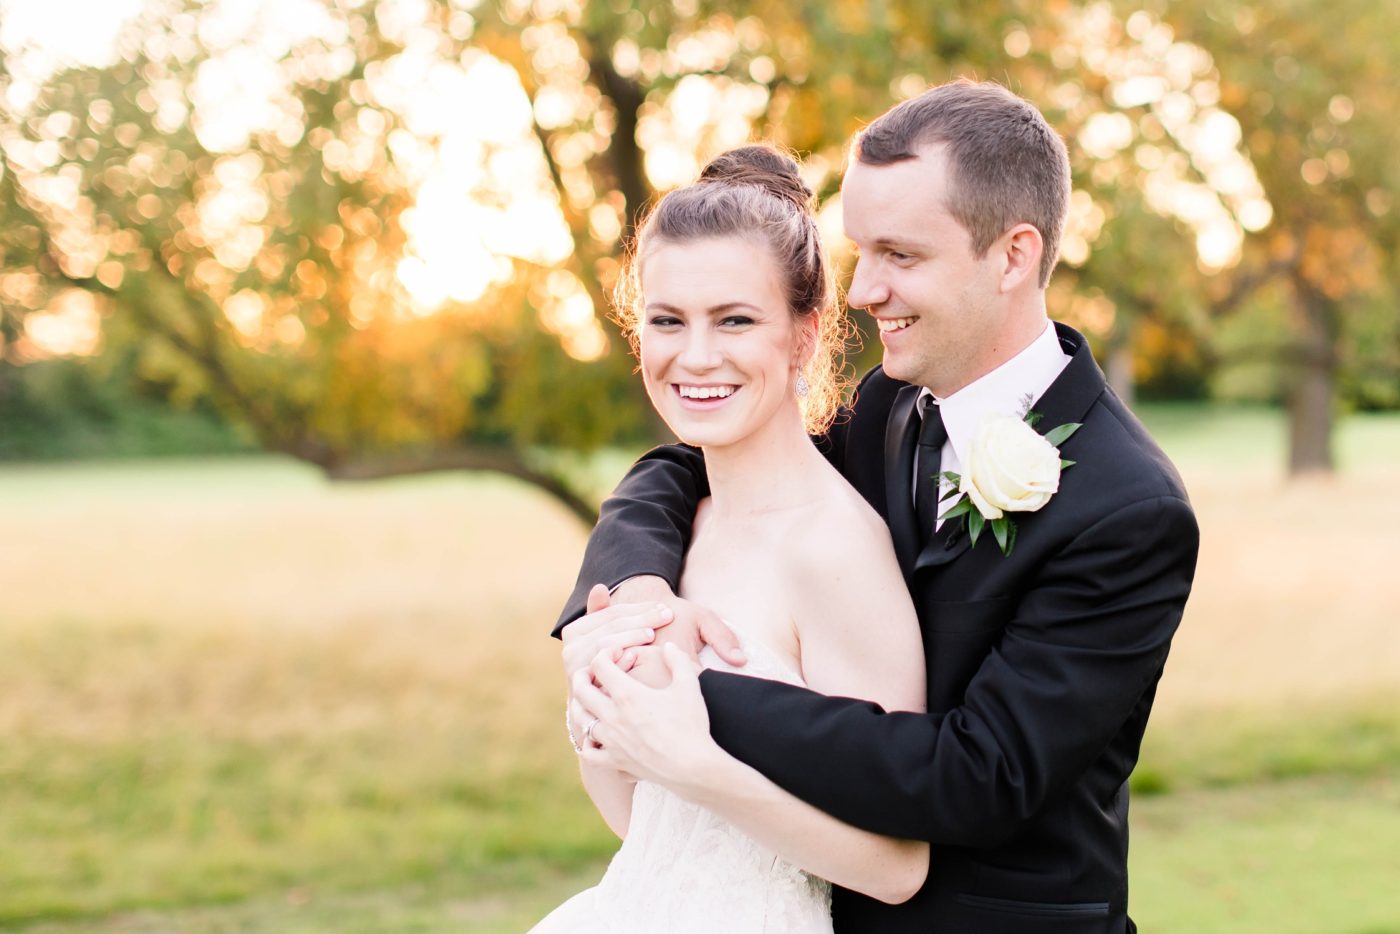 Bride joyfully laughing with her groom on her wedding day in a field of tall grass in Indiana 